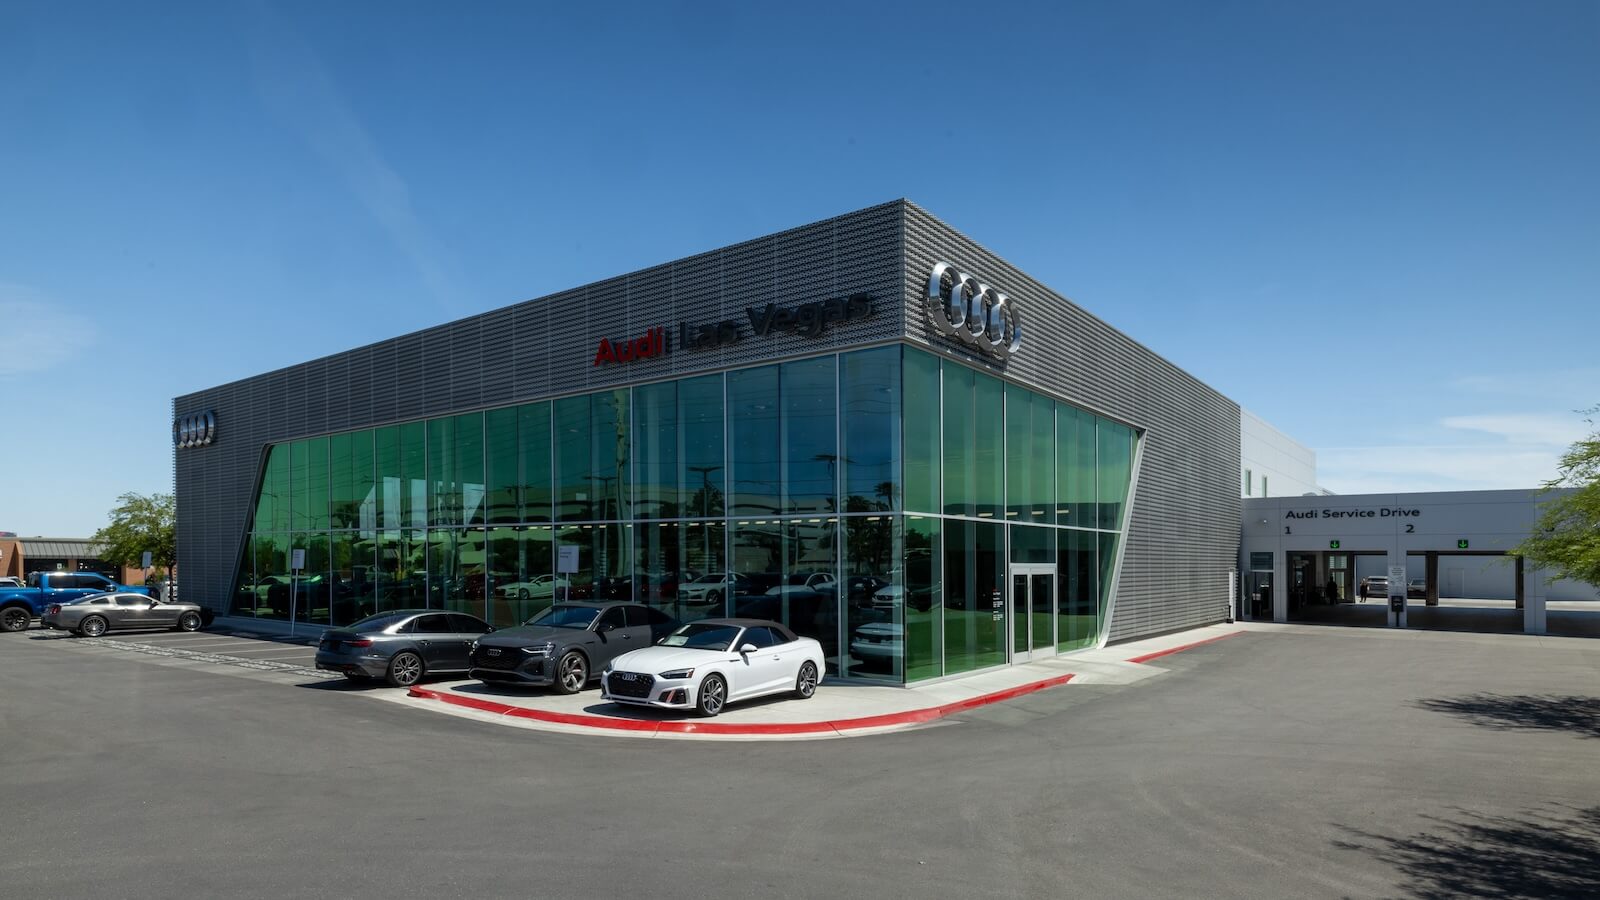 Exterior view of Audi Las Vegas during the day